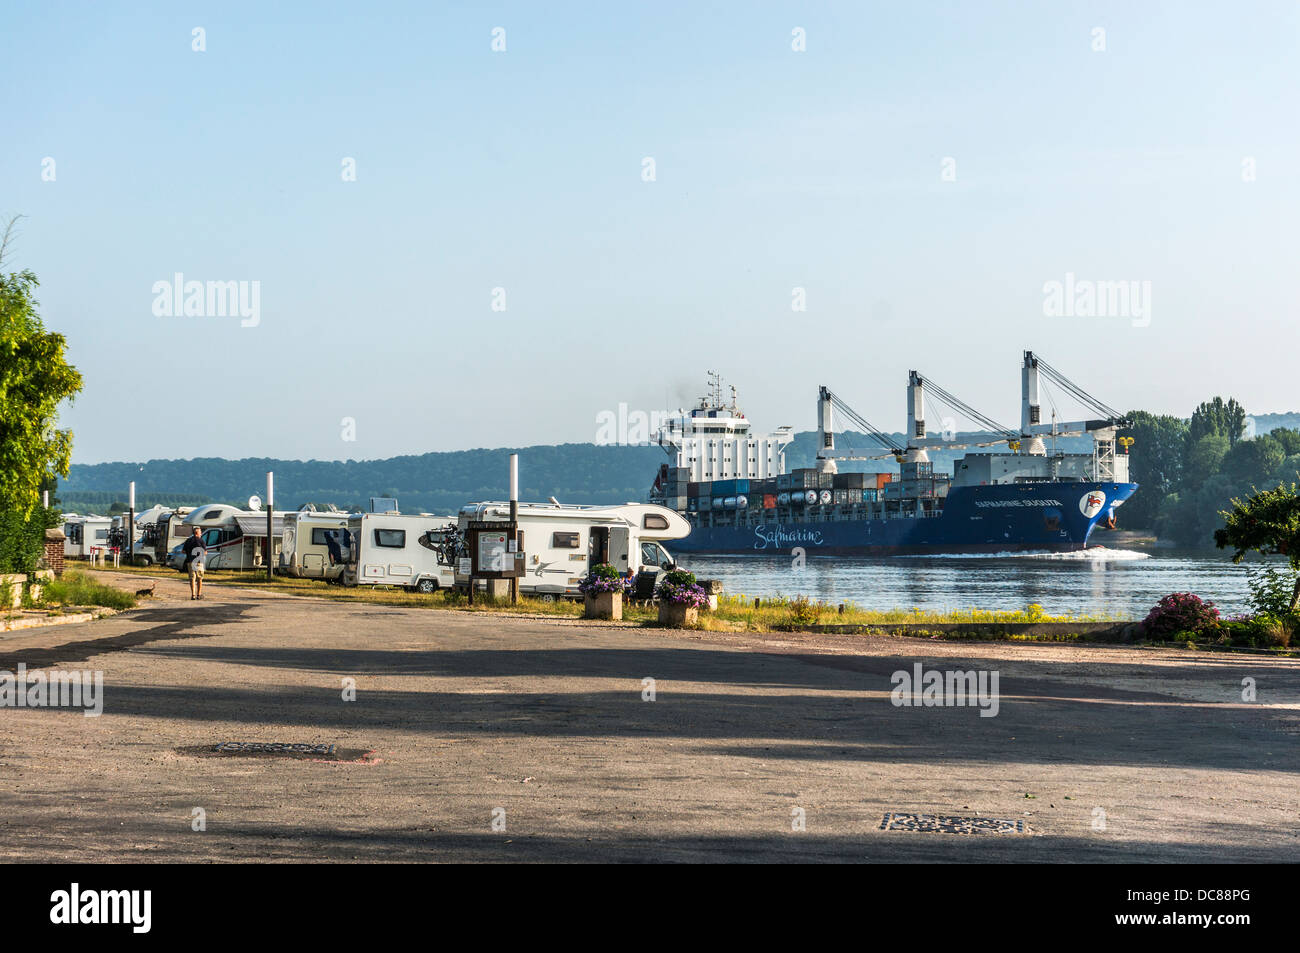 Motorhomes on aire de camping-car, with passing ship on river. La Mailleraye-sur-Seine, Seine-Maritime department, Haute-Normandie, northern France. Stock Photo